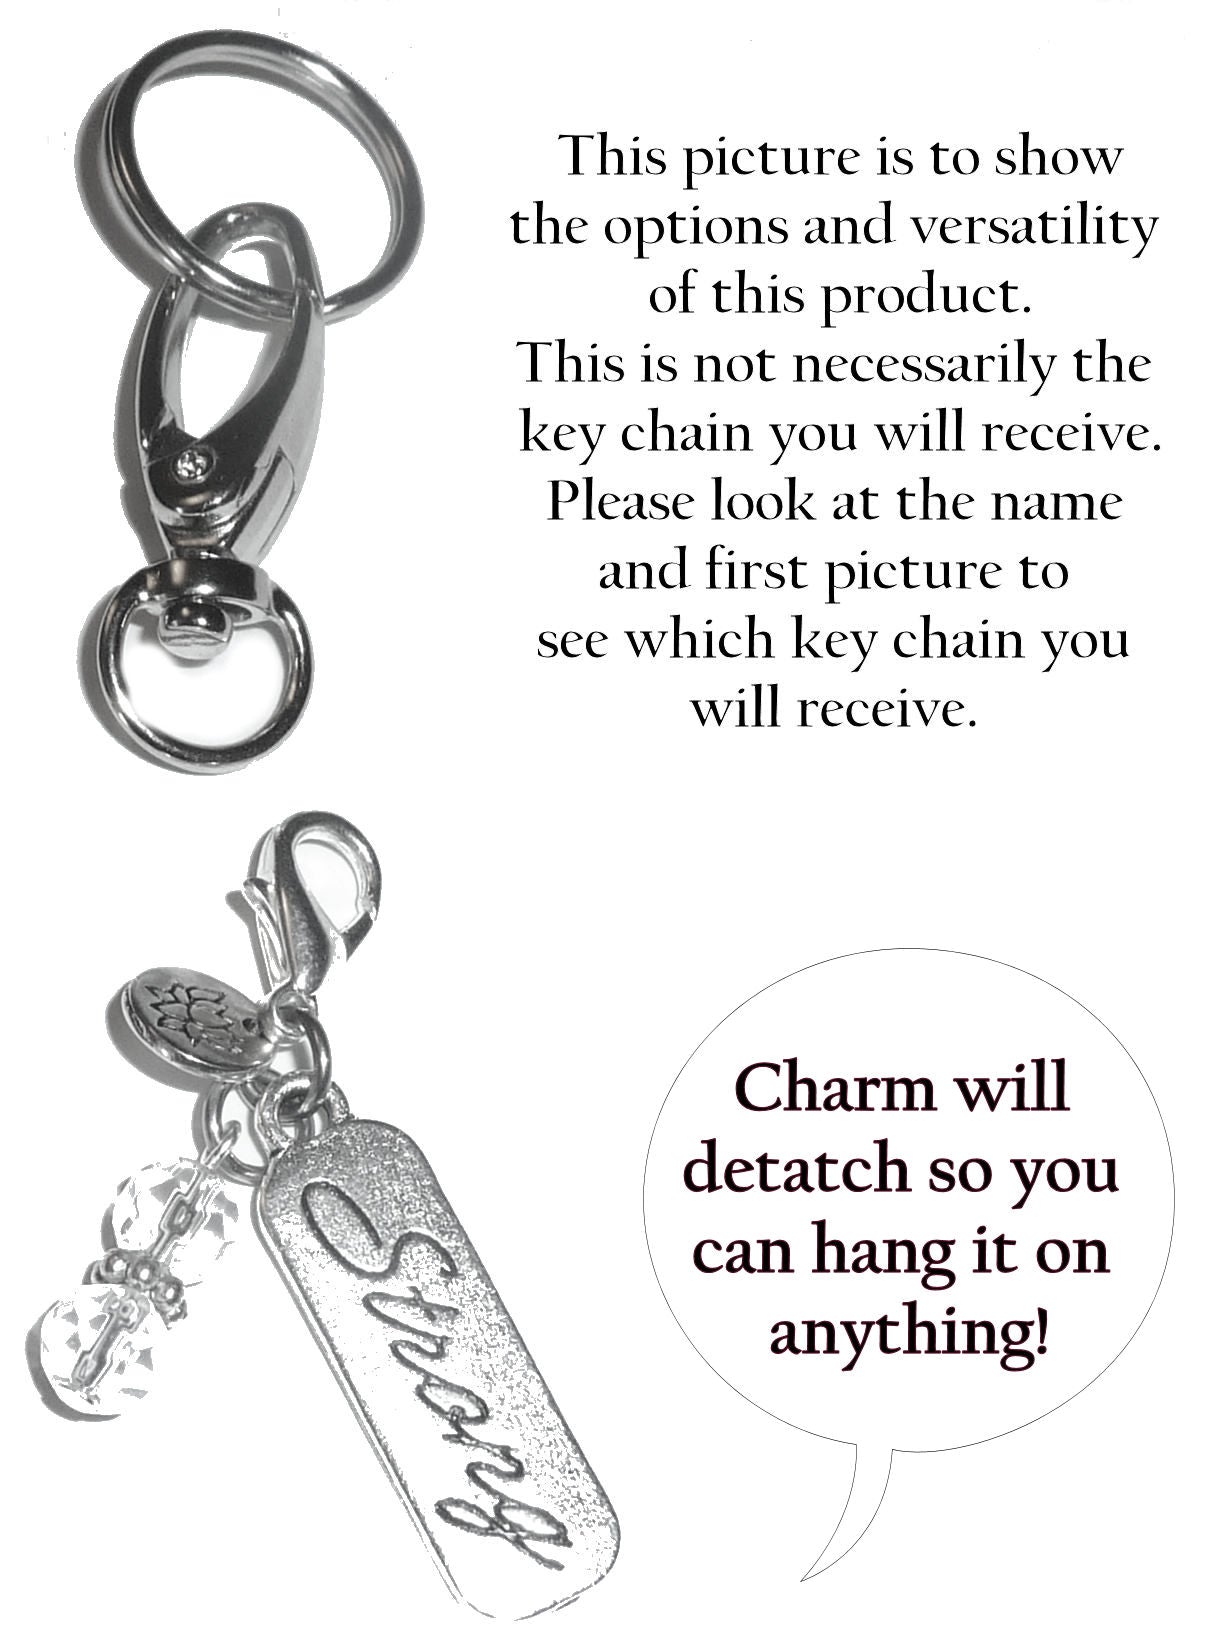 (K) Initial Charm Key Chain Ring, Women's Purse or Necklace Charm, Comes in a Gift Box!